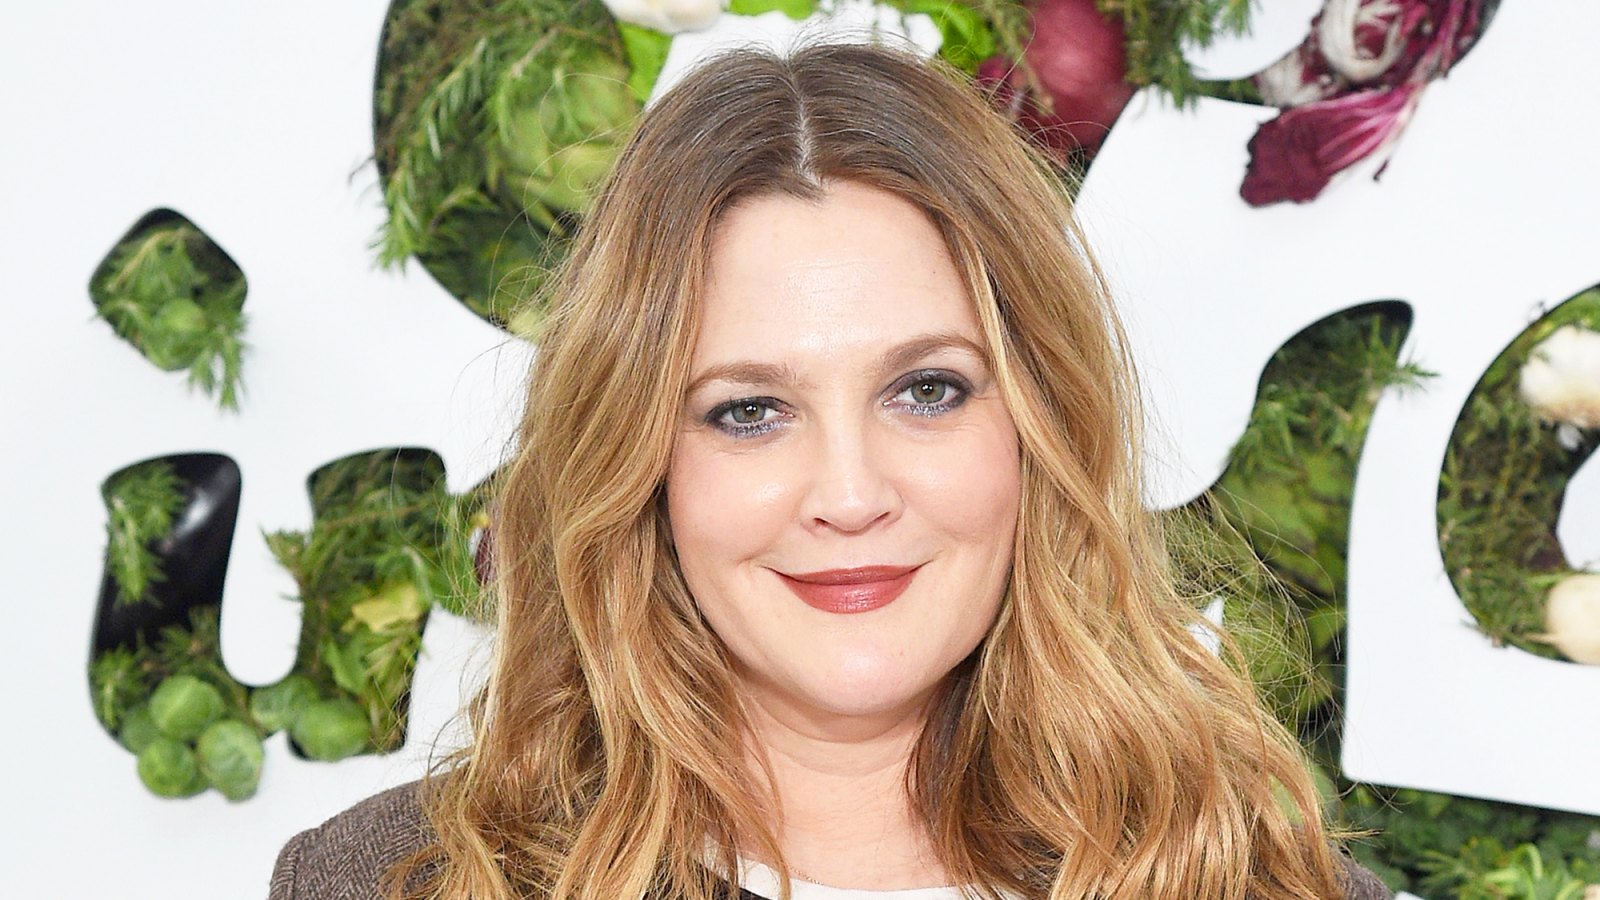 Drew Barrymore attends the in goop 2018 Health Summit in New York City.